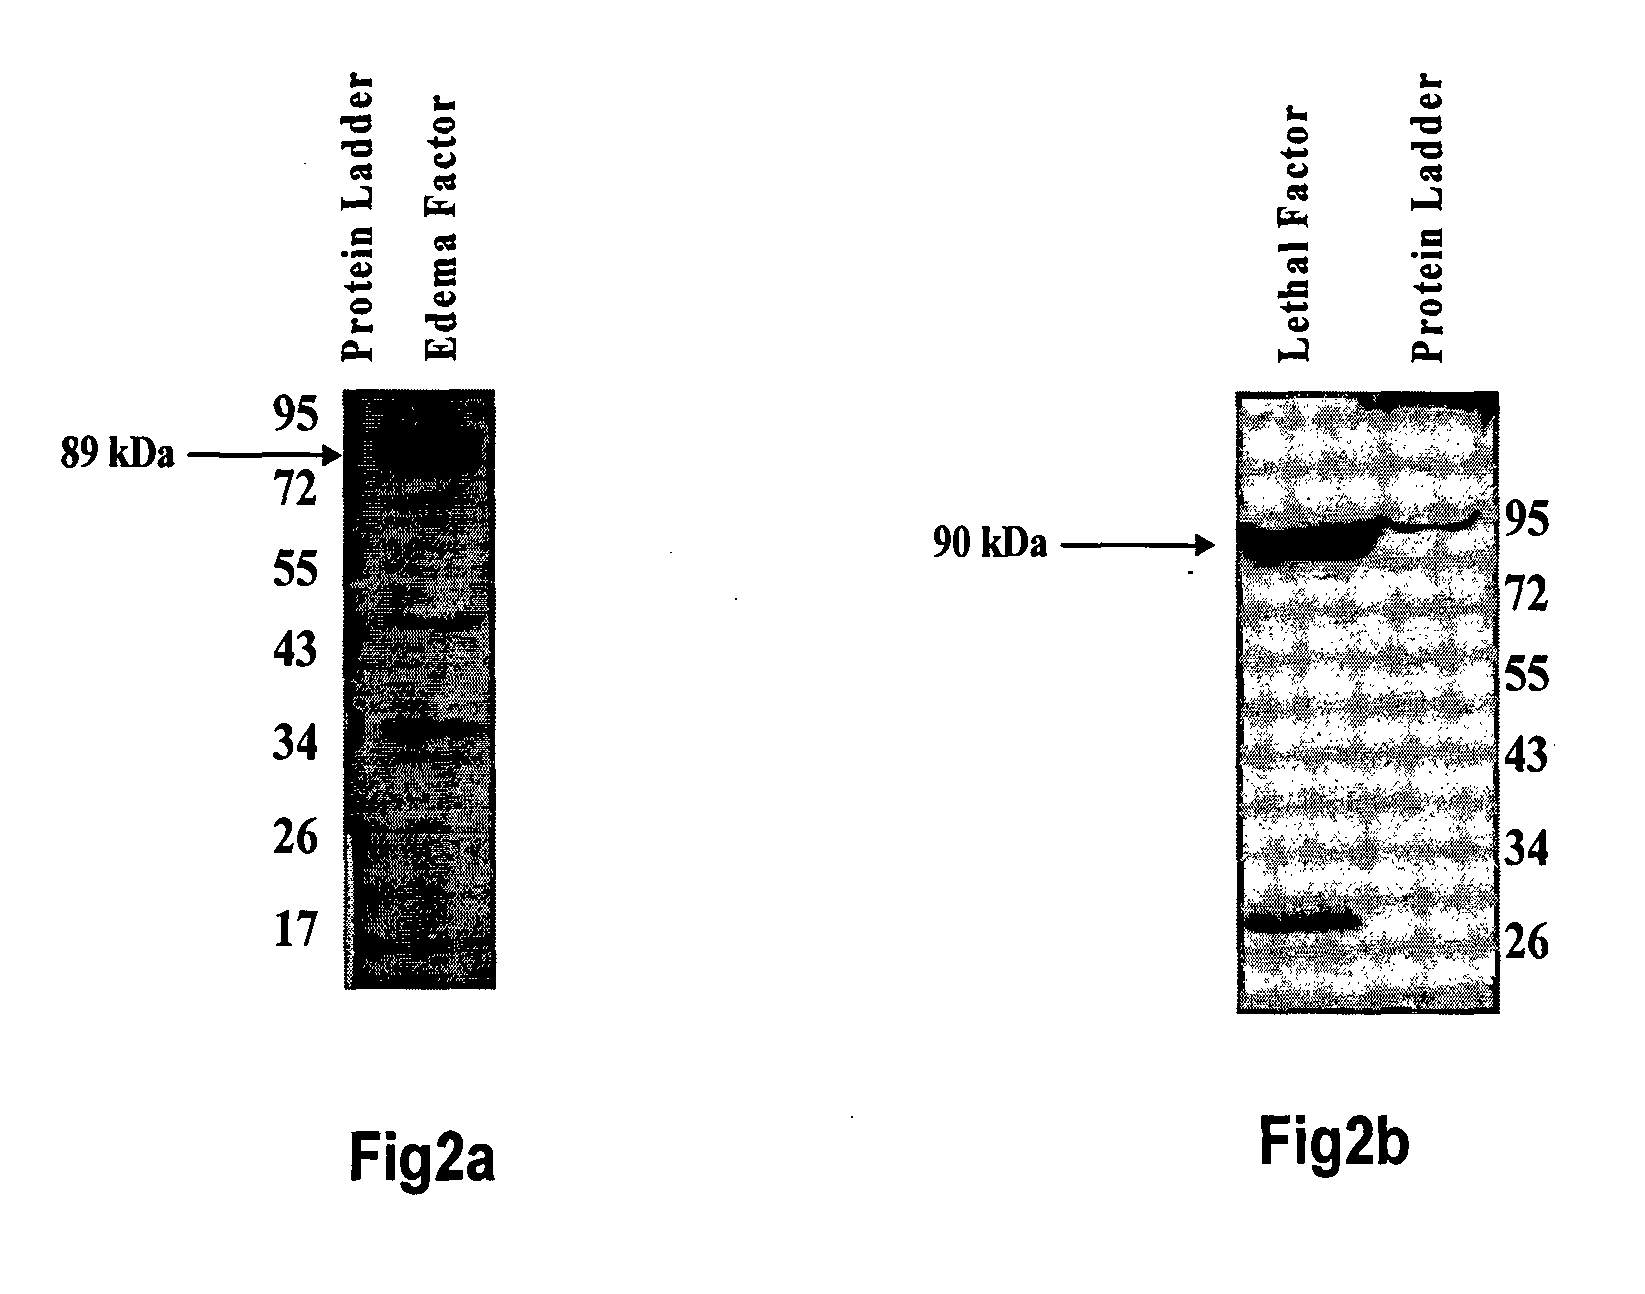 Bispecific monoclonal antibody capable of cross reacting with lethal factor (LF) and edema factor (EF), and neutralizing edema toxin (ET) as well as lethal toxin (LT) of bacillus anthracis